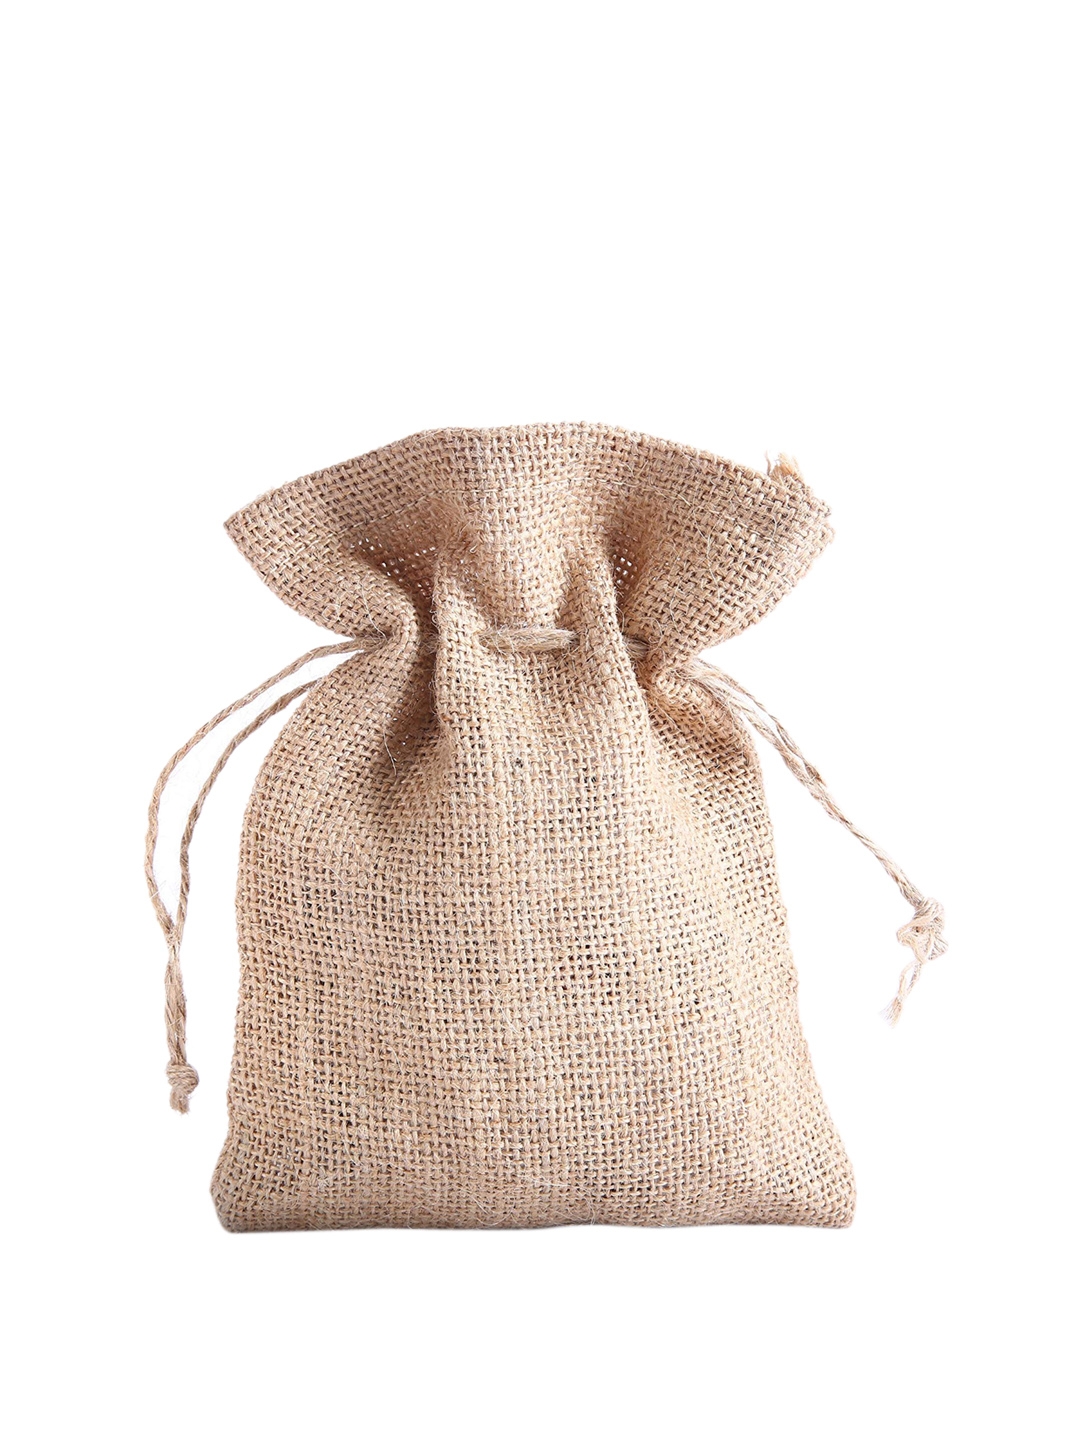 earthbags Pack of 12 Jute Pouches with Twine Drawstring Closure